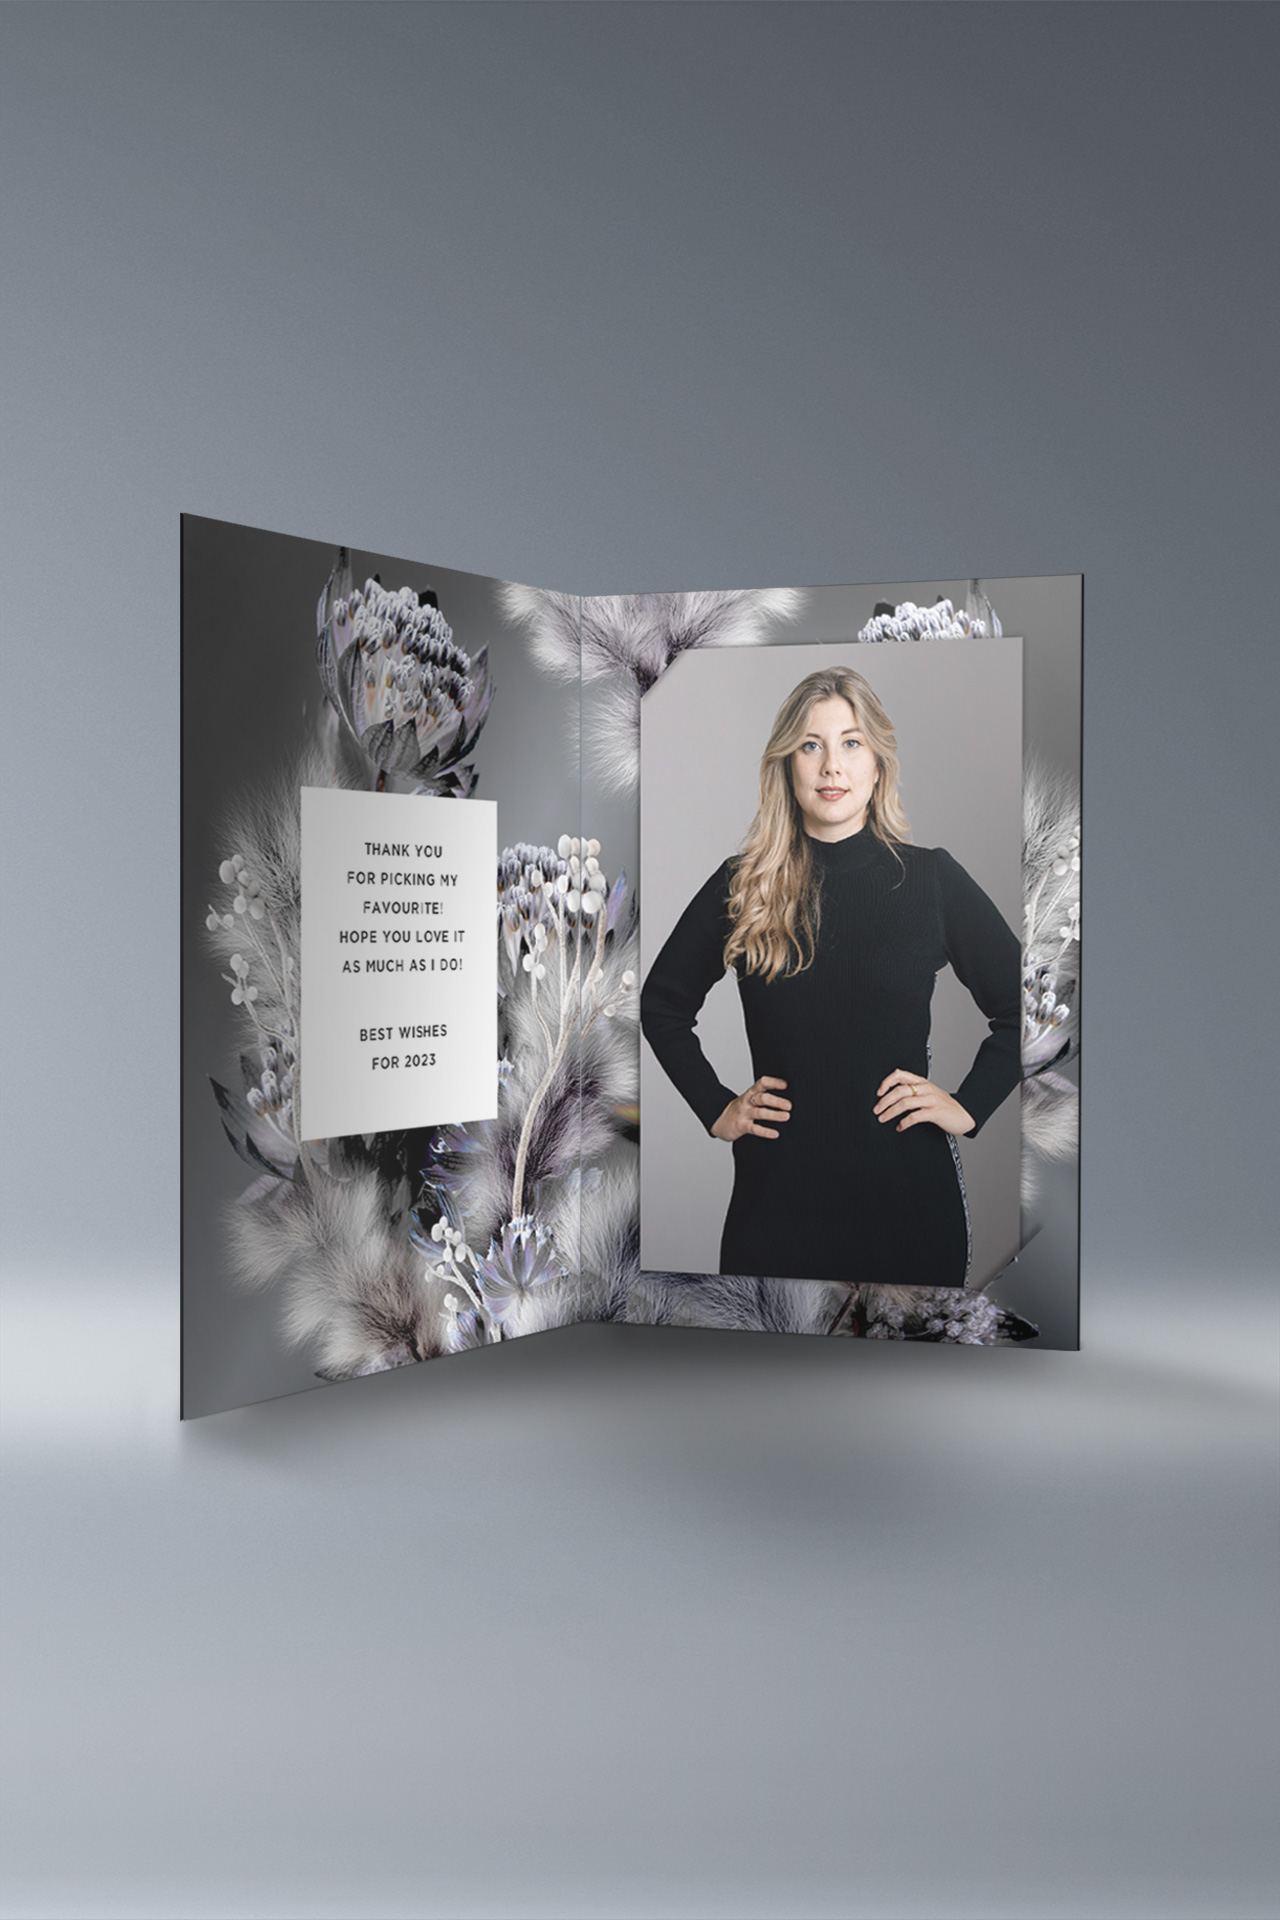 Dfrost, Visual Identity, Visual Communication, Brand Identity, Brand Communications, Corporate Design, Packaging, Design, Christmas, Webshop, Christmas Webshop, Dfrost